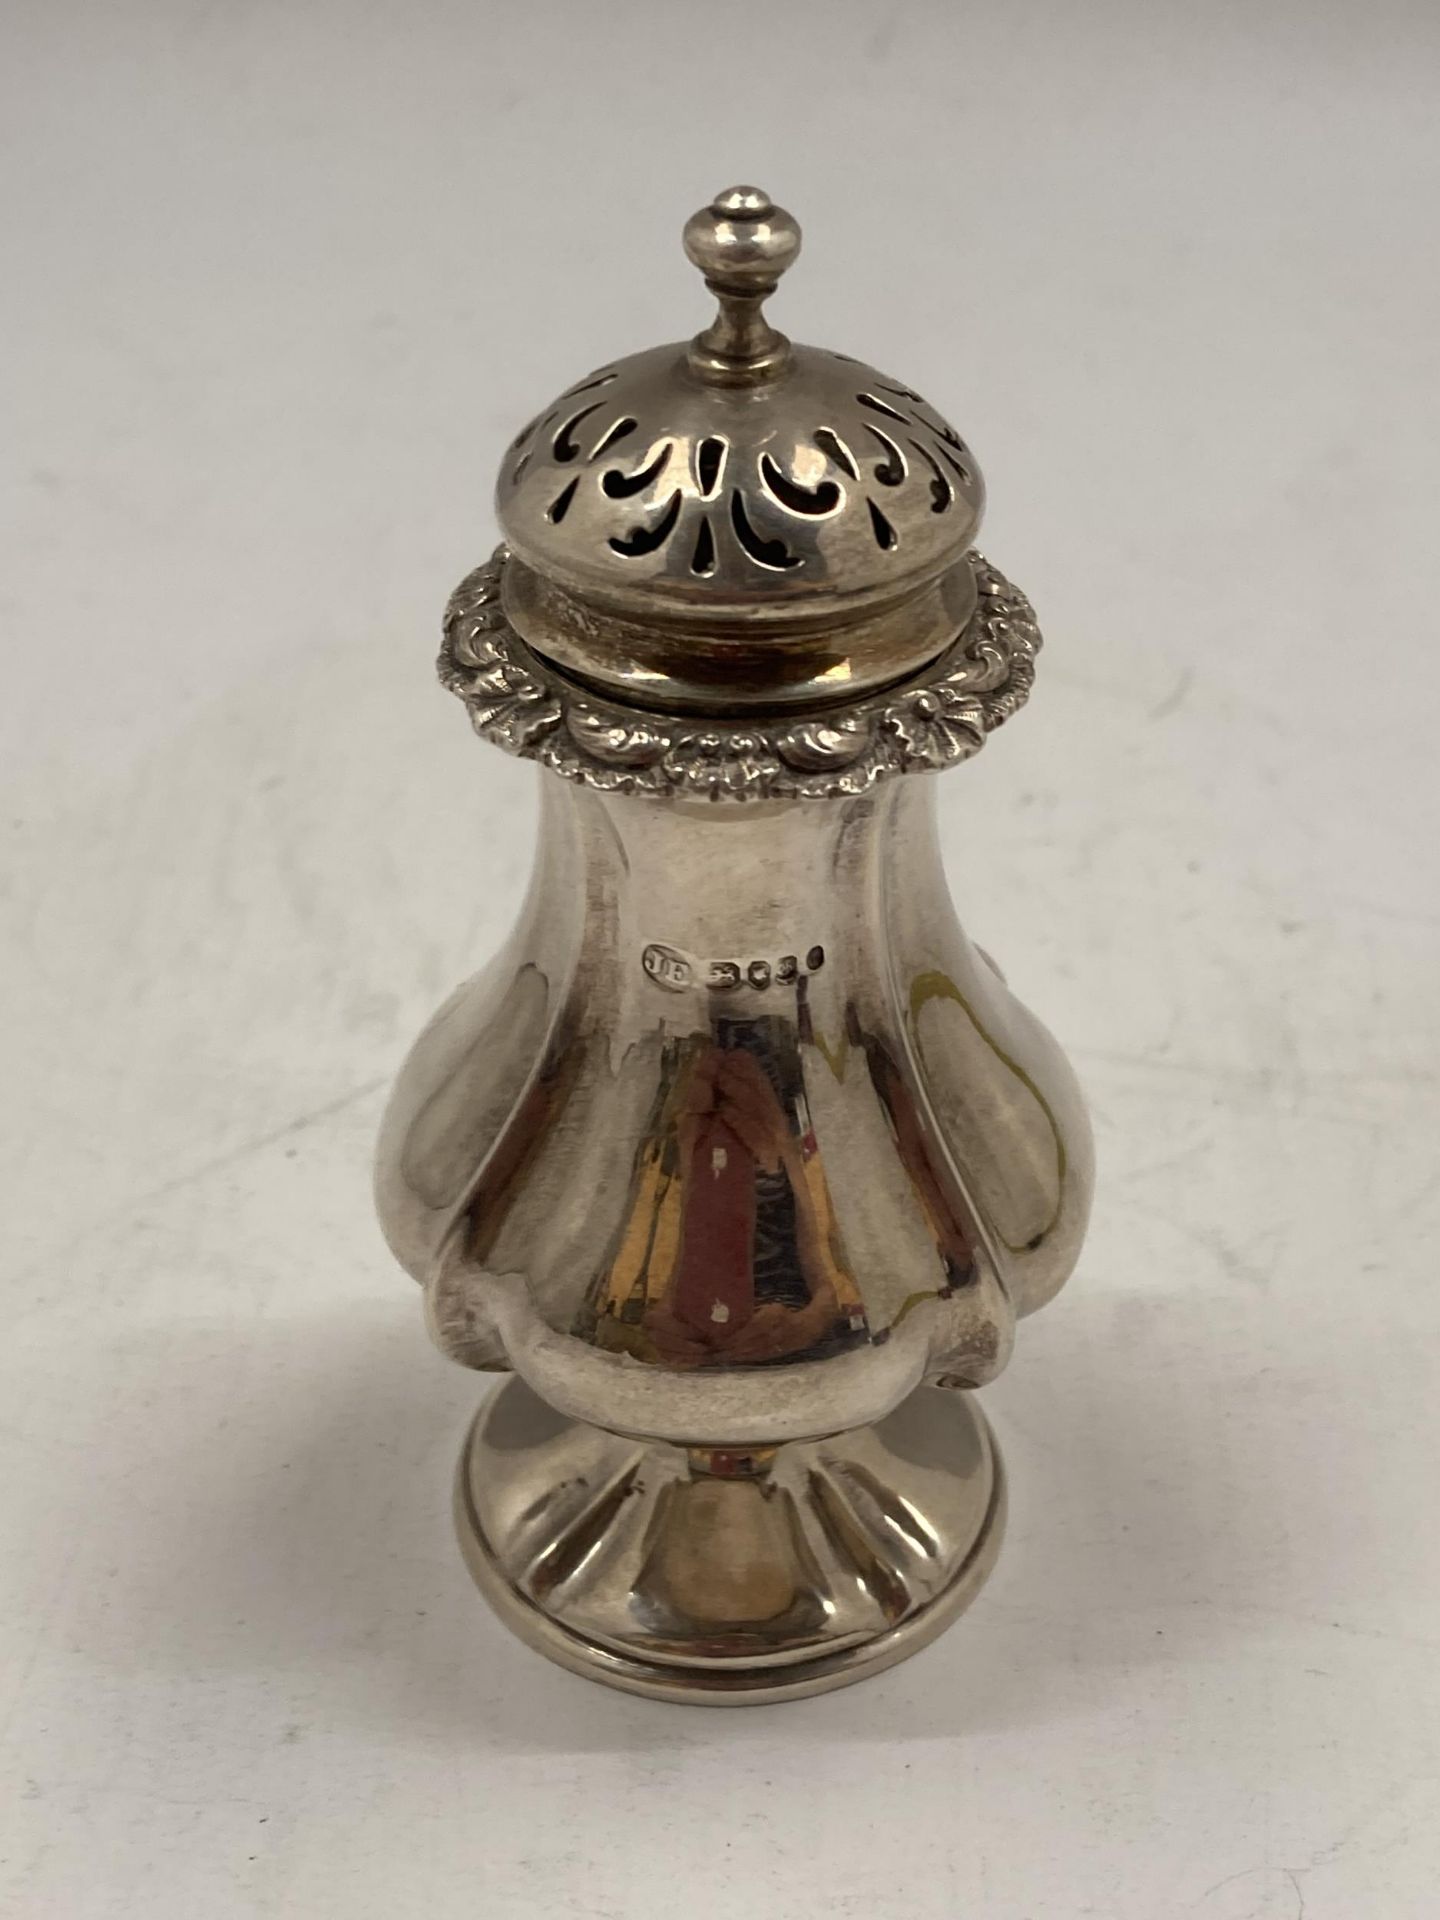 A VICTORIAN HALLMARKED SILVER SUGAR SIFTER - Image 2 of 2